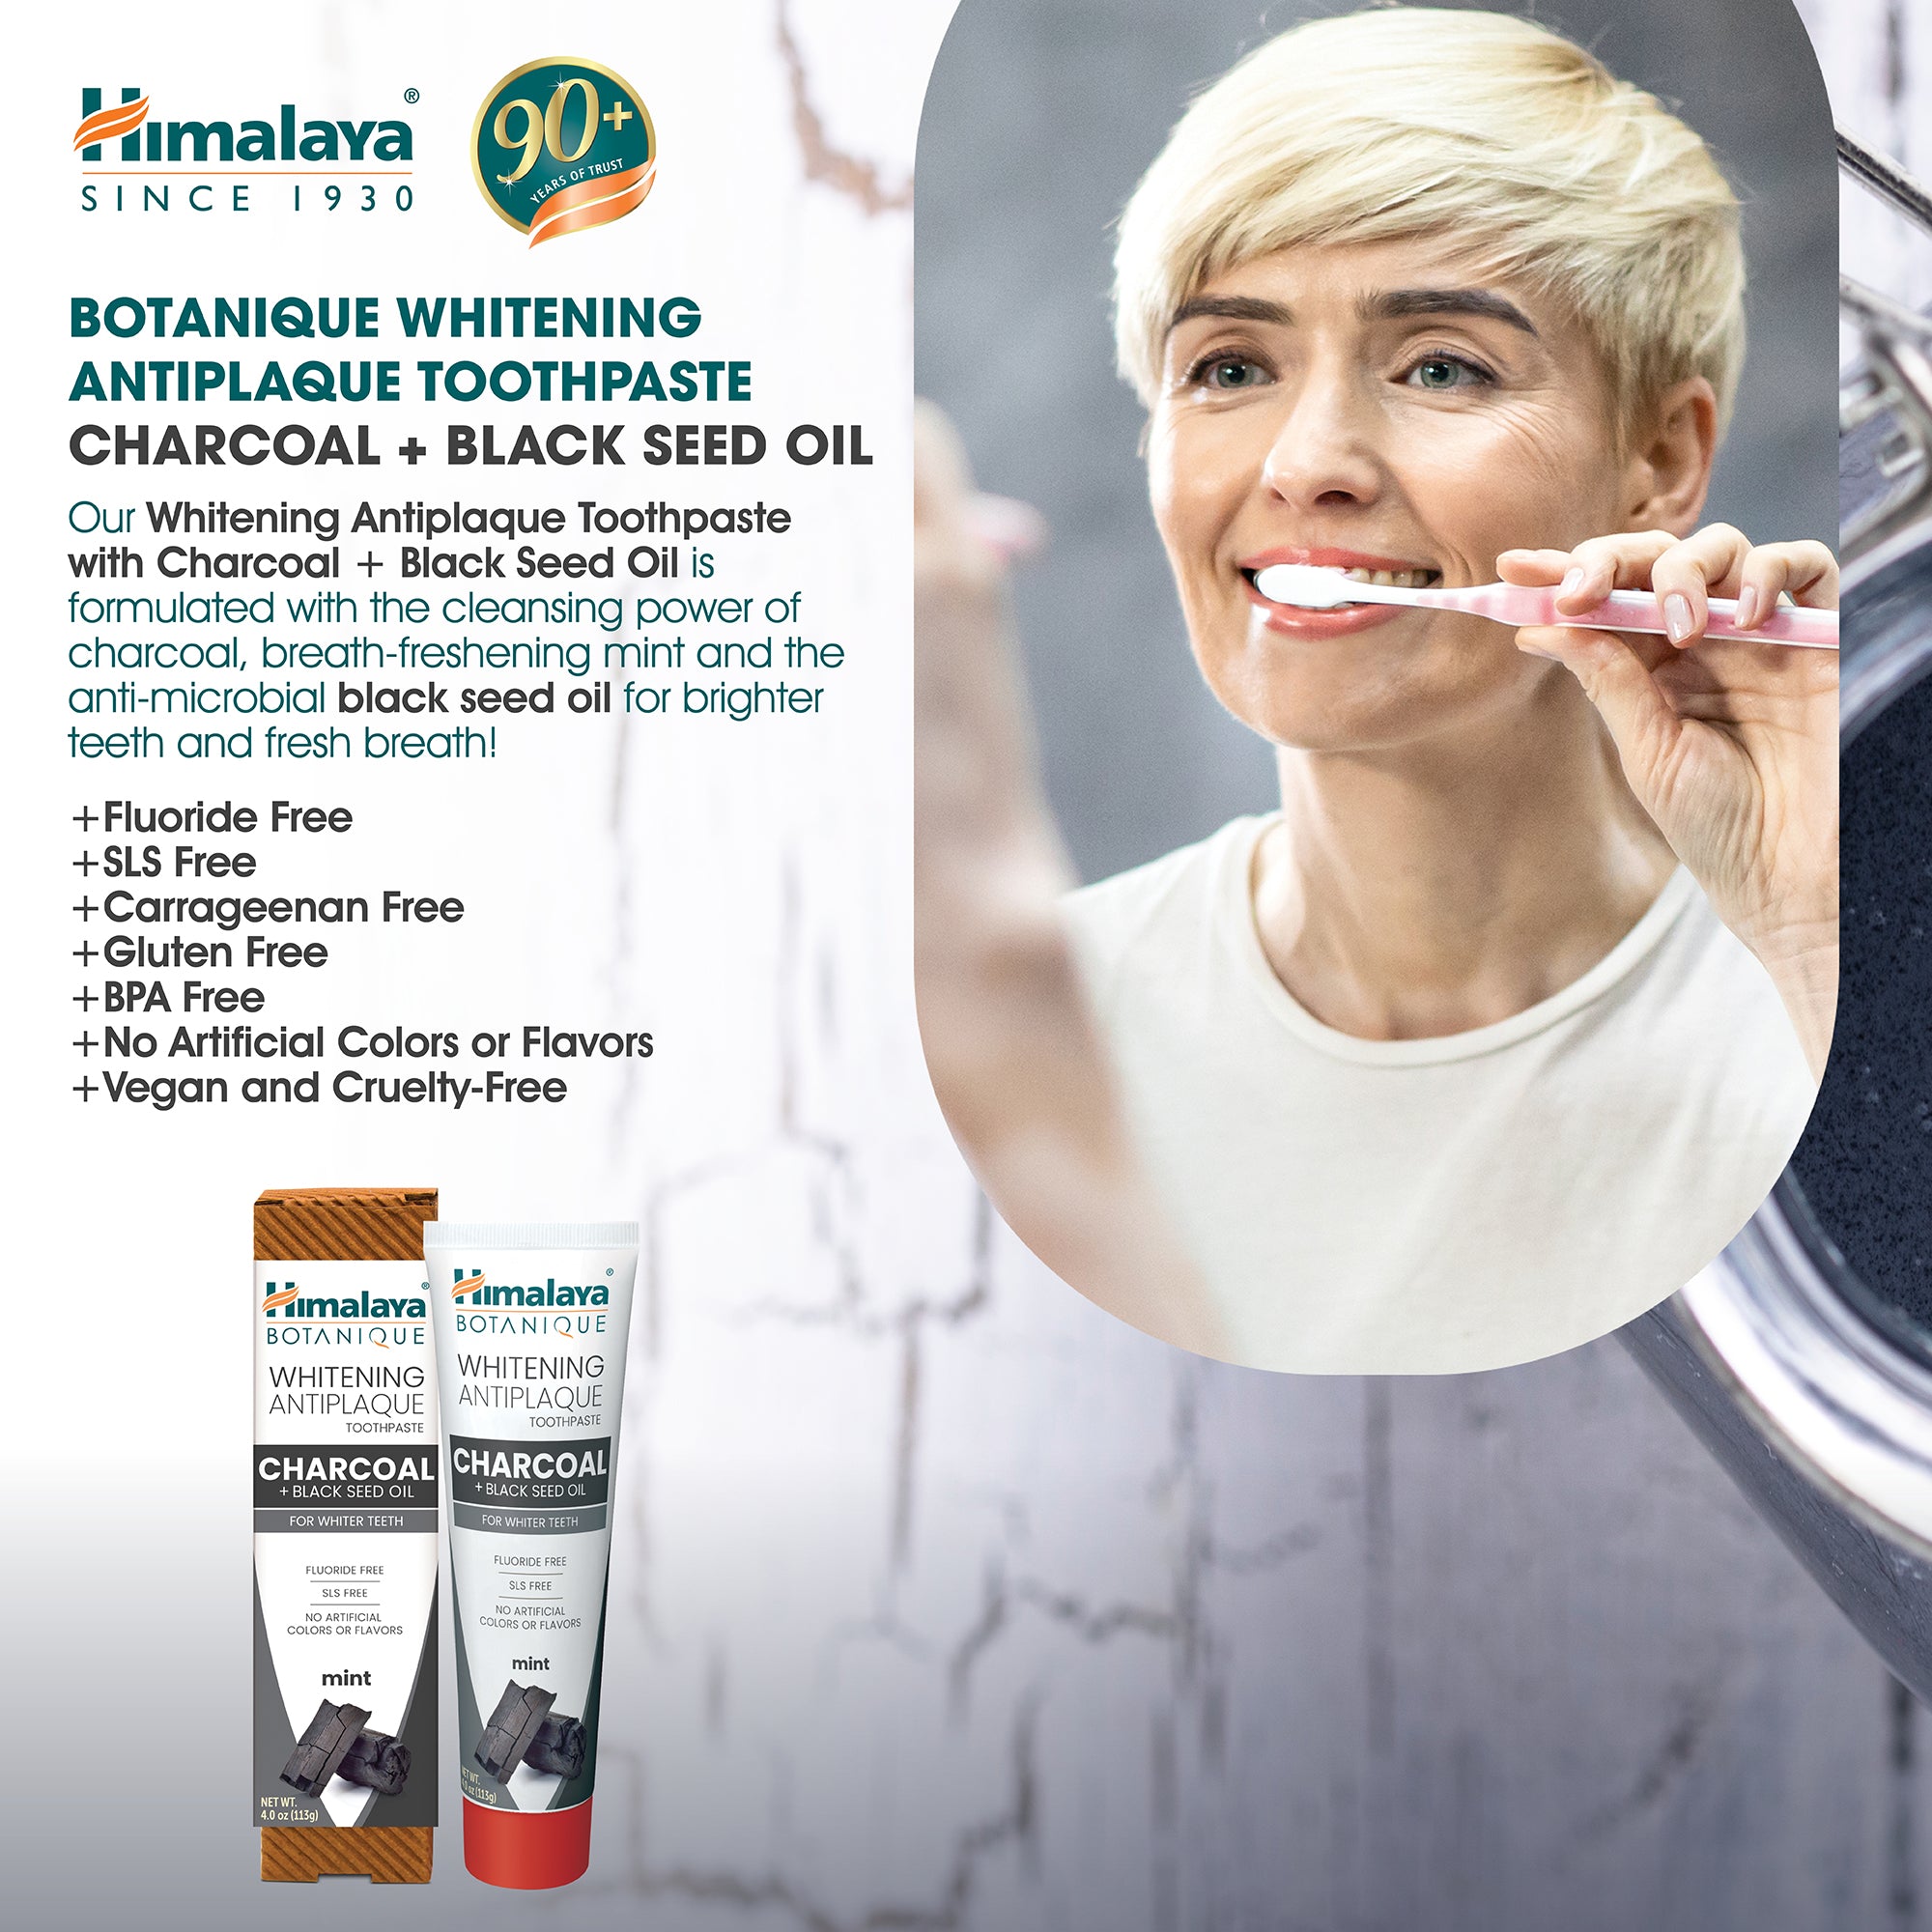 Himalaya Botanique Whitening Antiplaque Toothpaste Charcoal + Black Seed Oil 113G (Pack of 3)